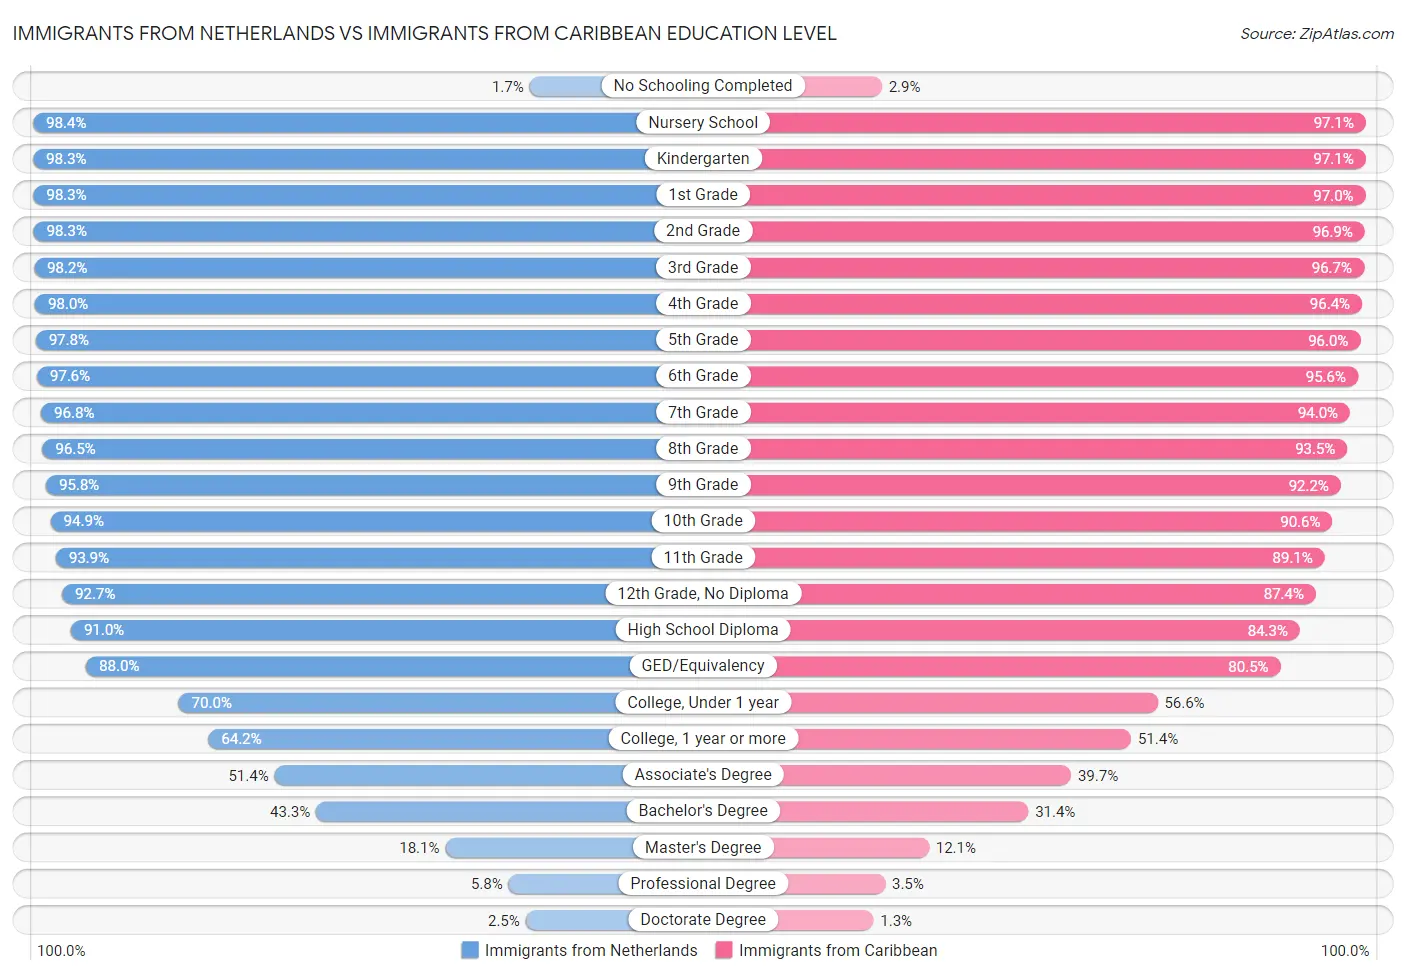 Immigrants from Netherlands vs Immigrants from Caribbean Education Level